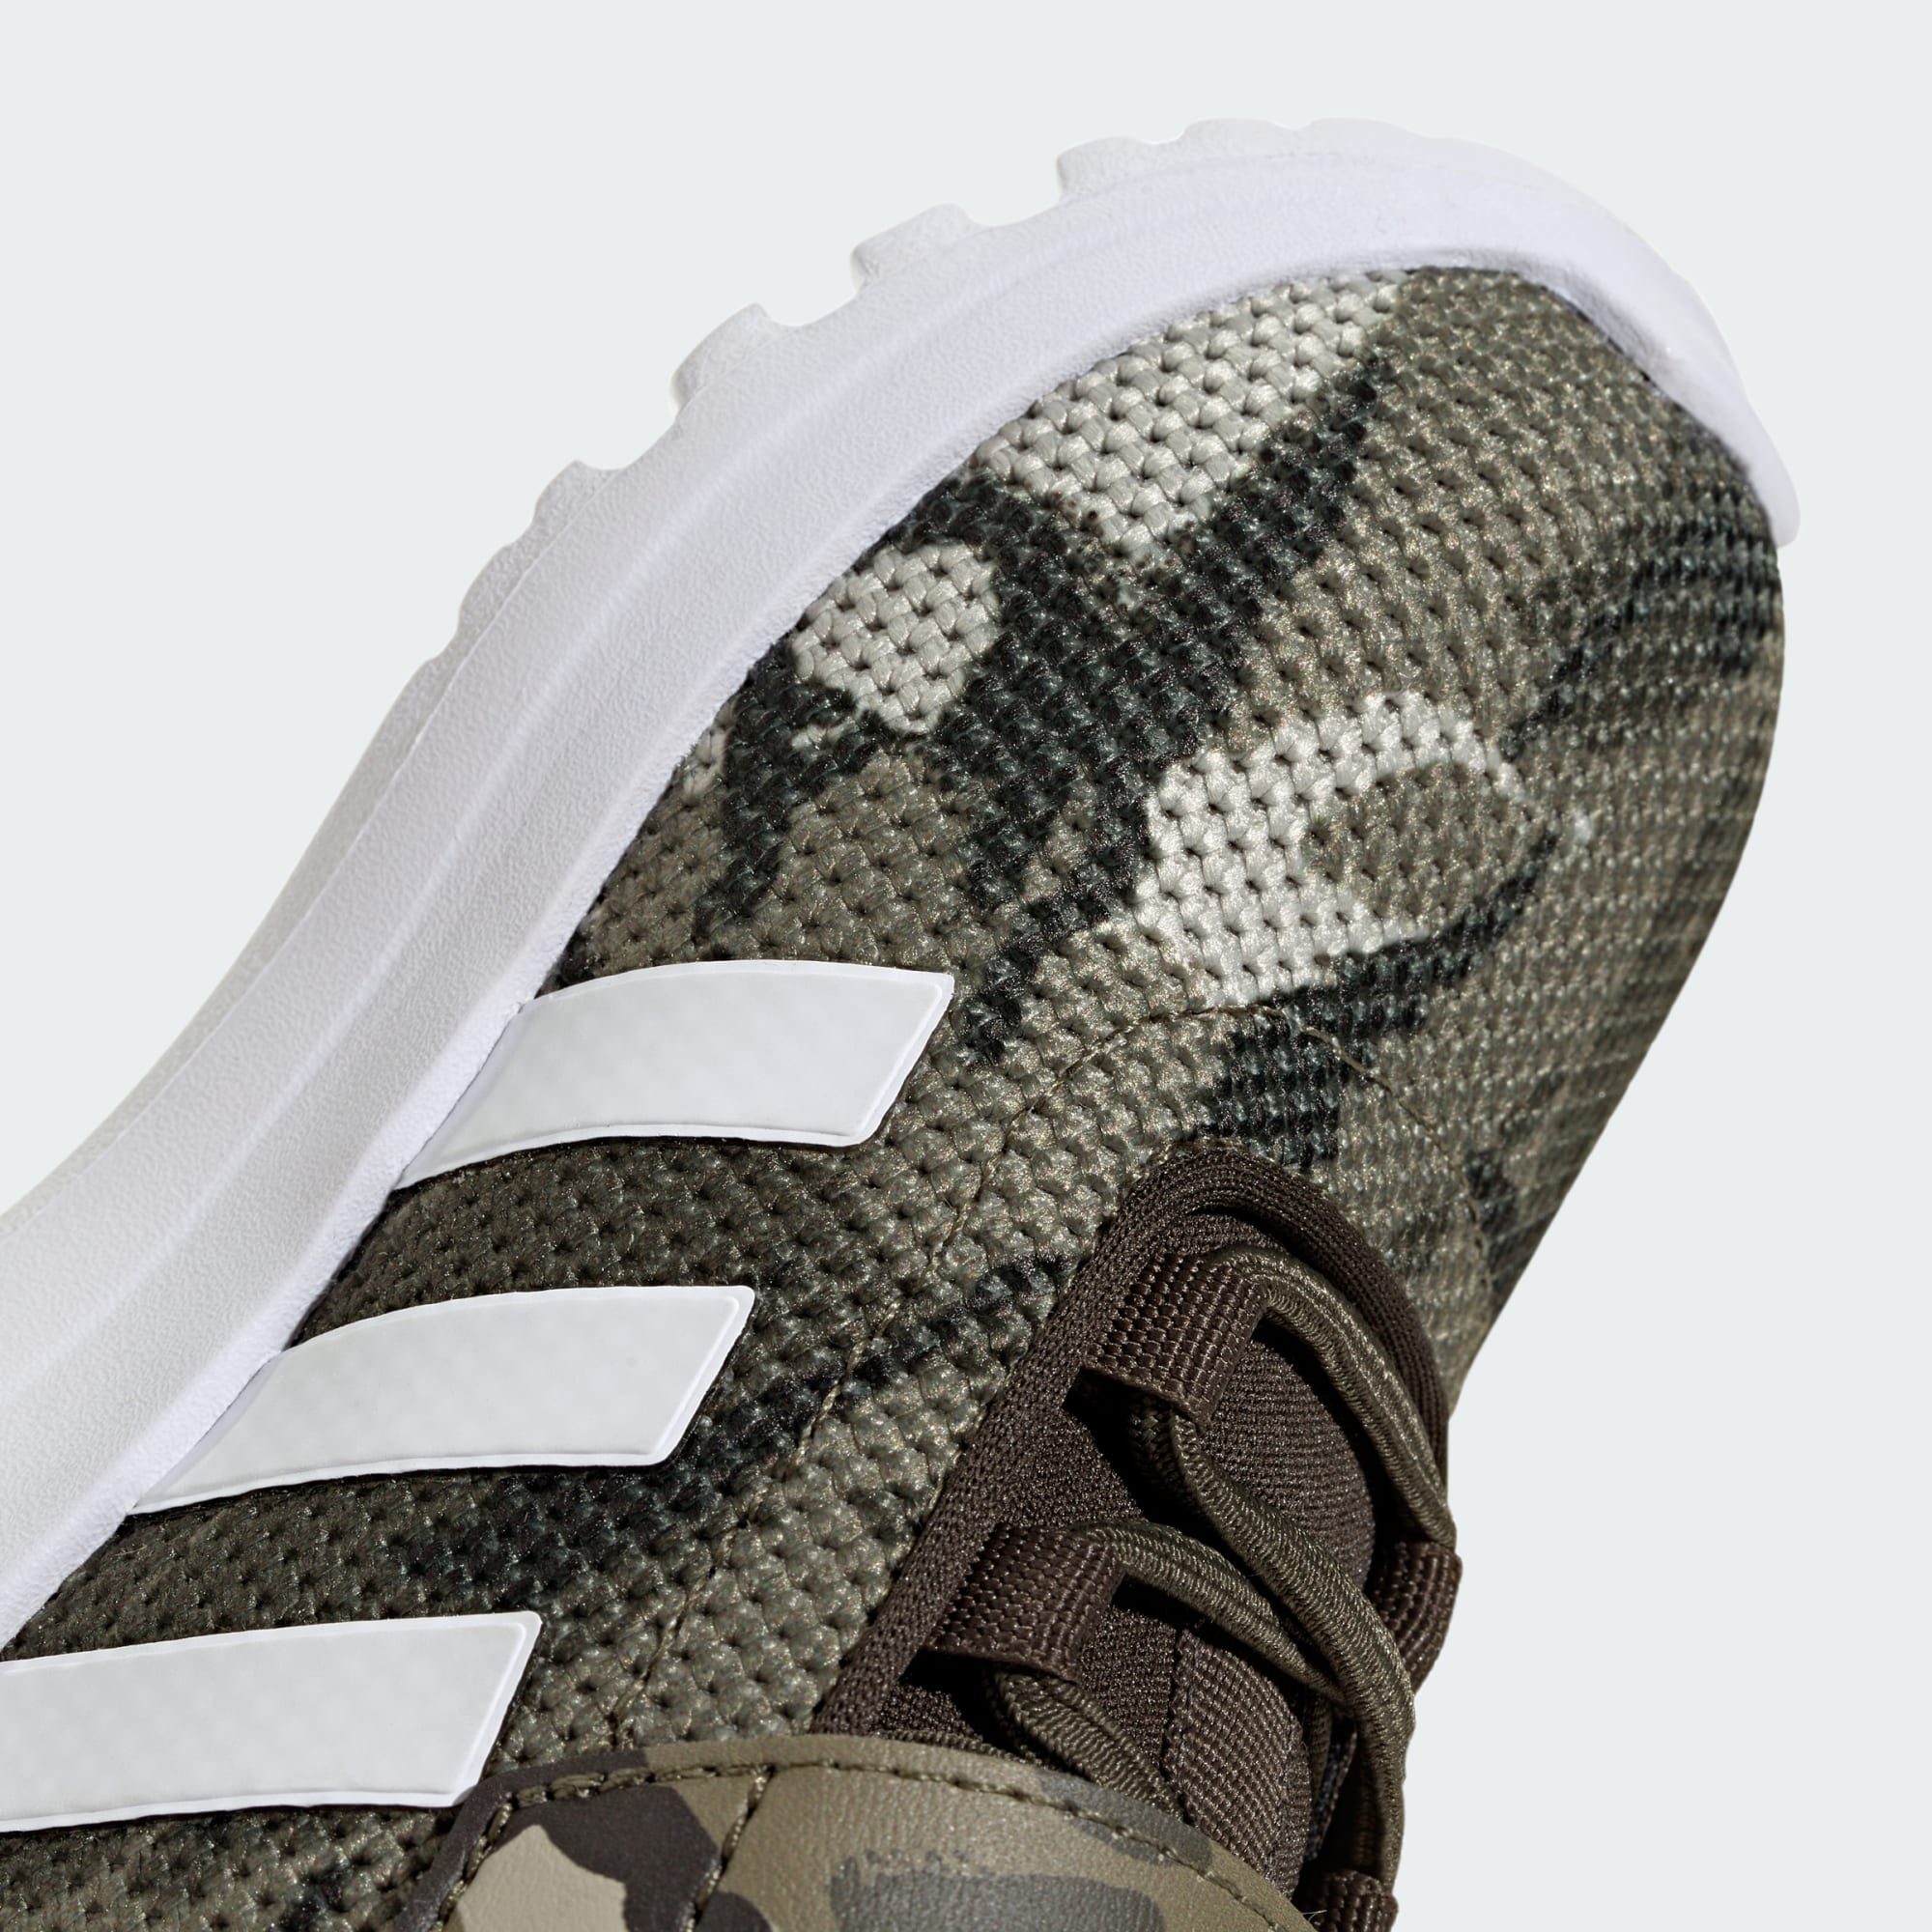 White Sneaker SCHUH / Cloud Strata Olive / Olive Shadow Sportswear adidas KIDS RACER TR23